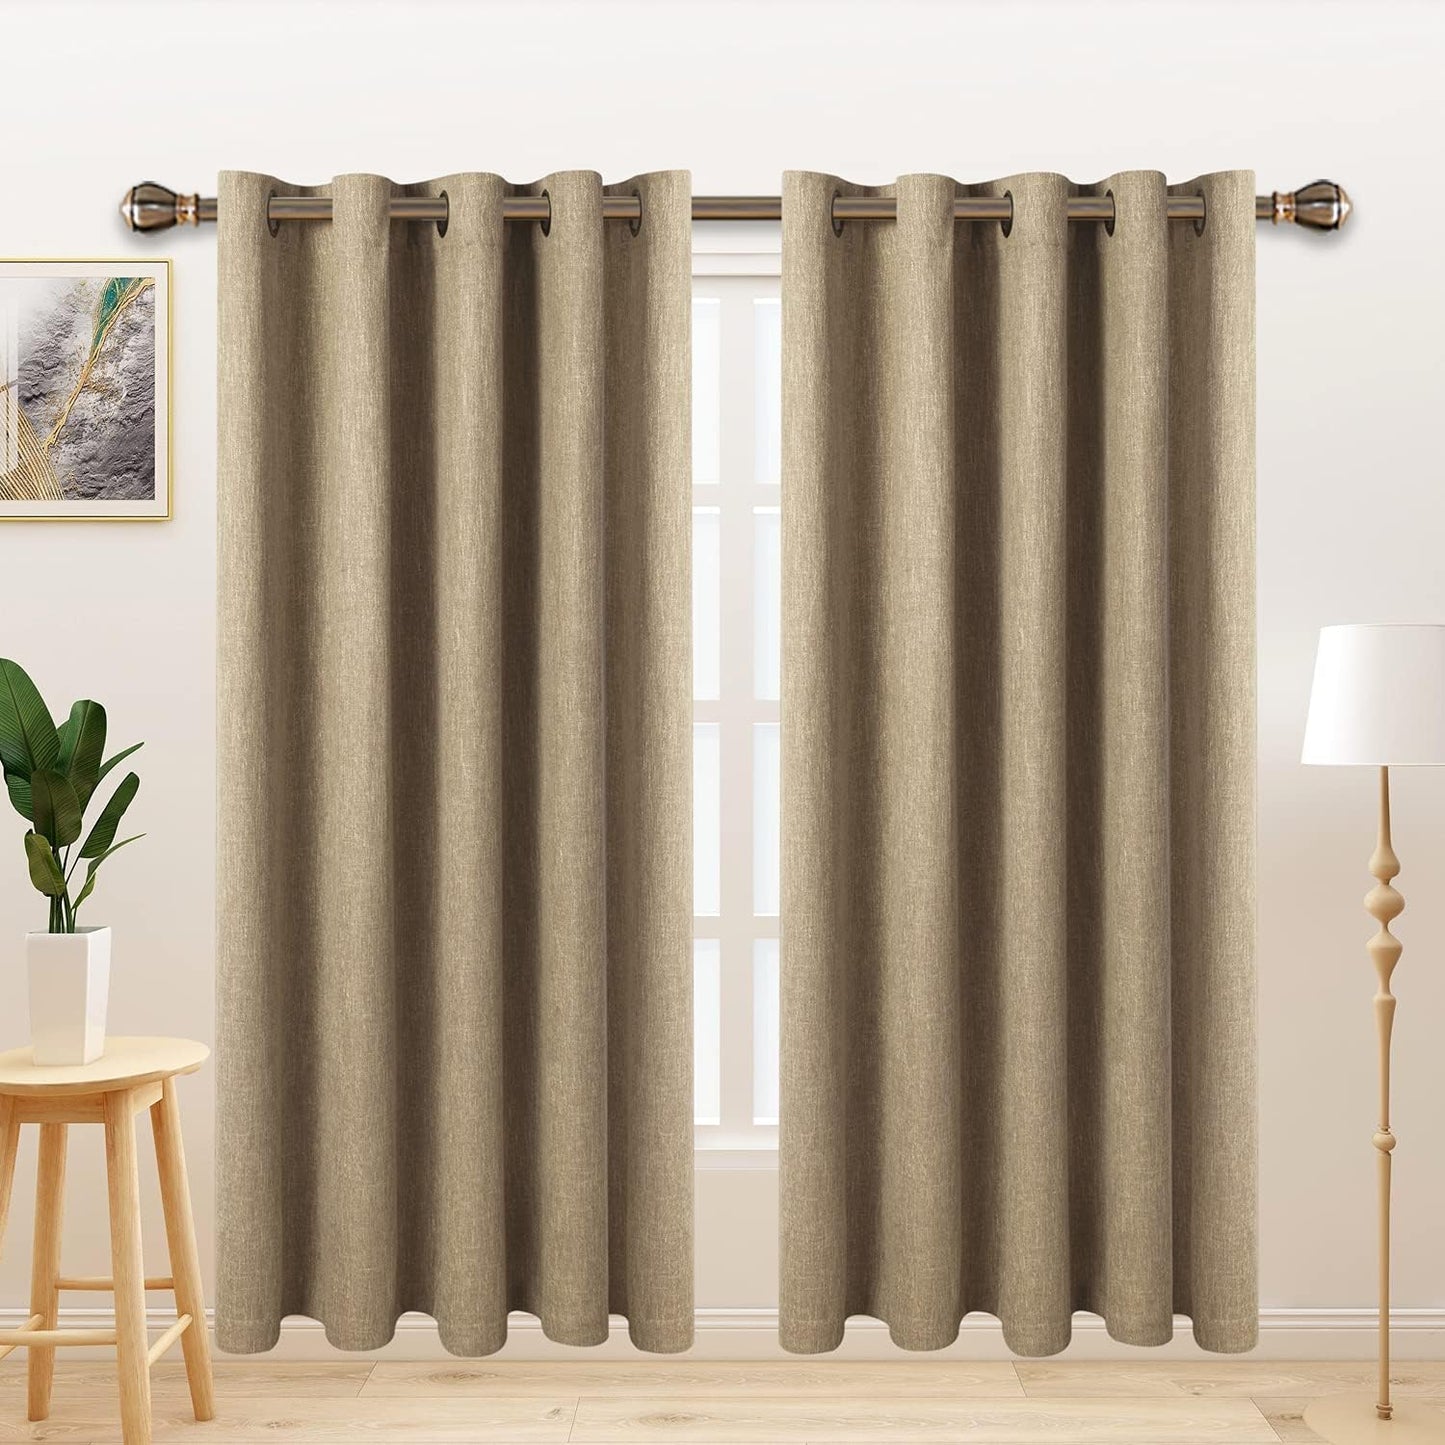 LORDTEX Linen Look Textured Blackout Curtains with Thermal Insulated Liner - Heavy Thick Grommet Window Drapes for Bedroom, 50 X 84 Inches, Ivory, Set of 2 Panels  LORDTEX Tan 70 X 84 Inches 